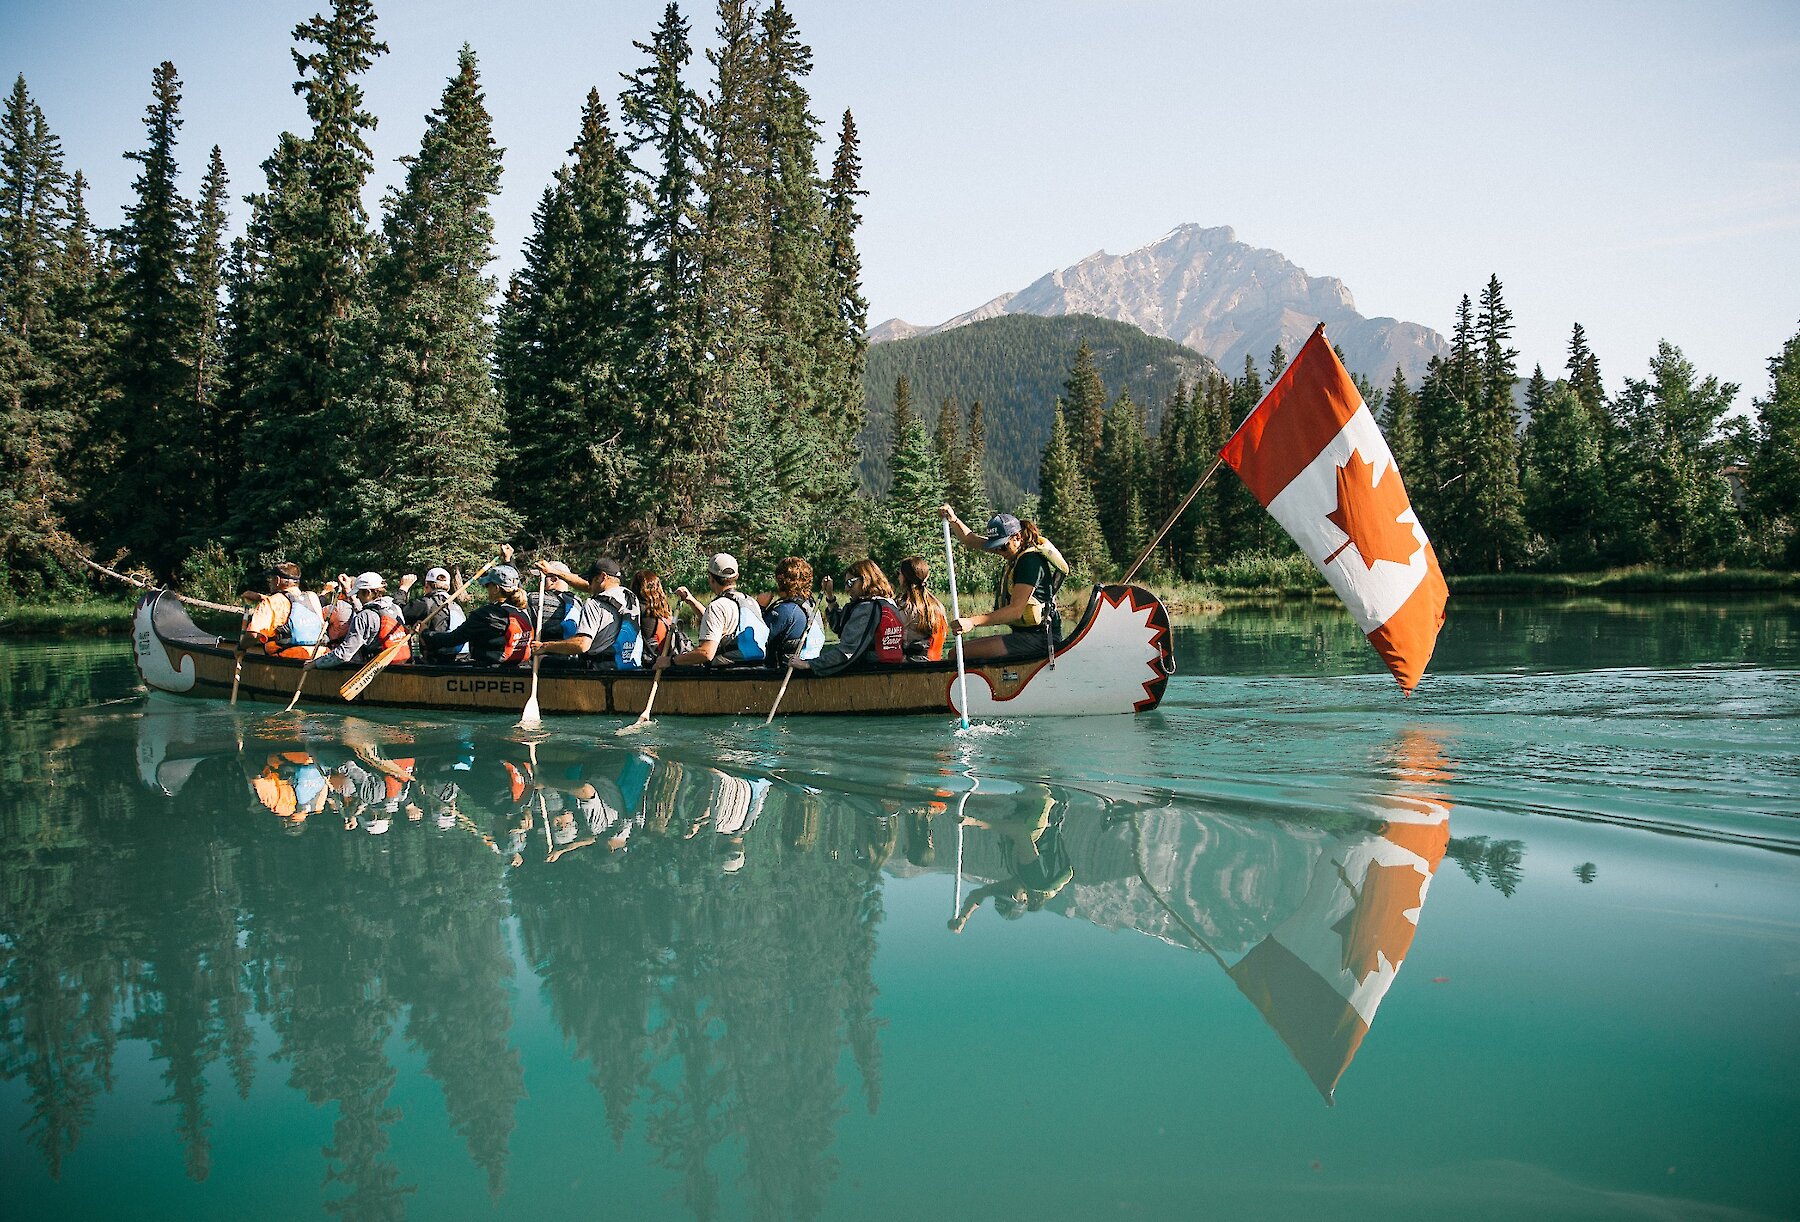 The Big Canoe Tour heading up the Bow River